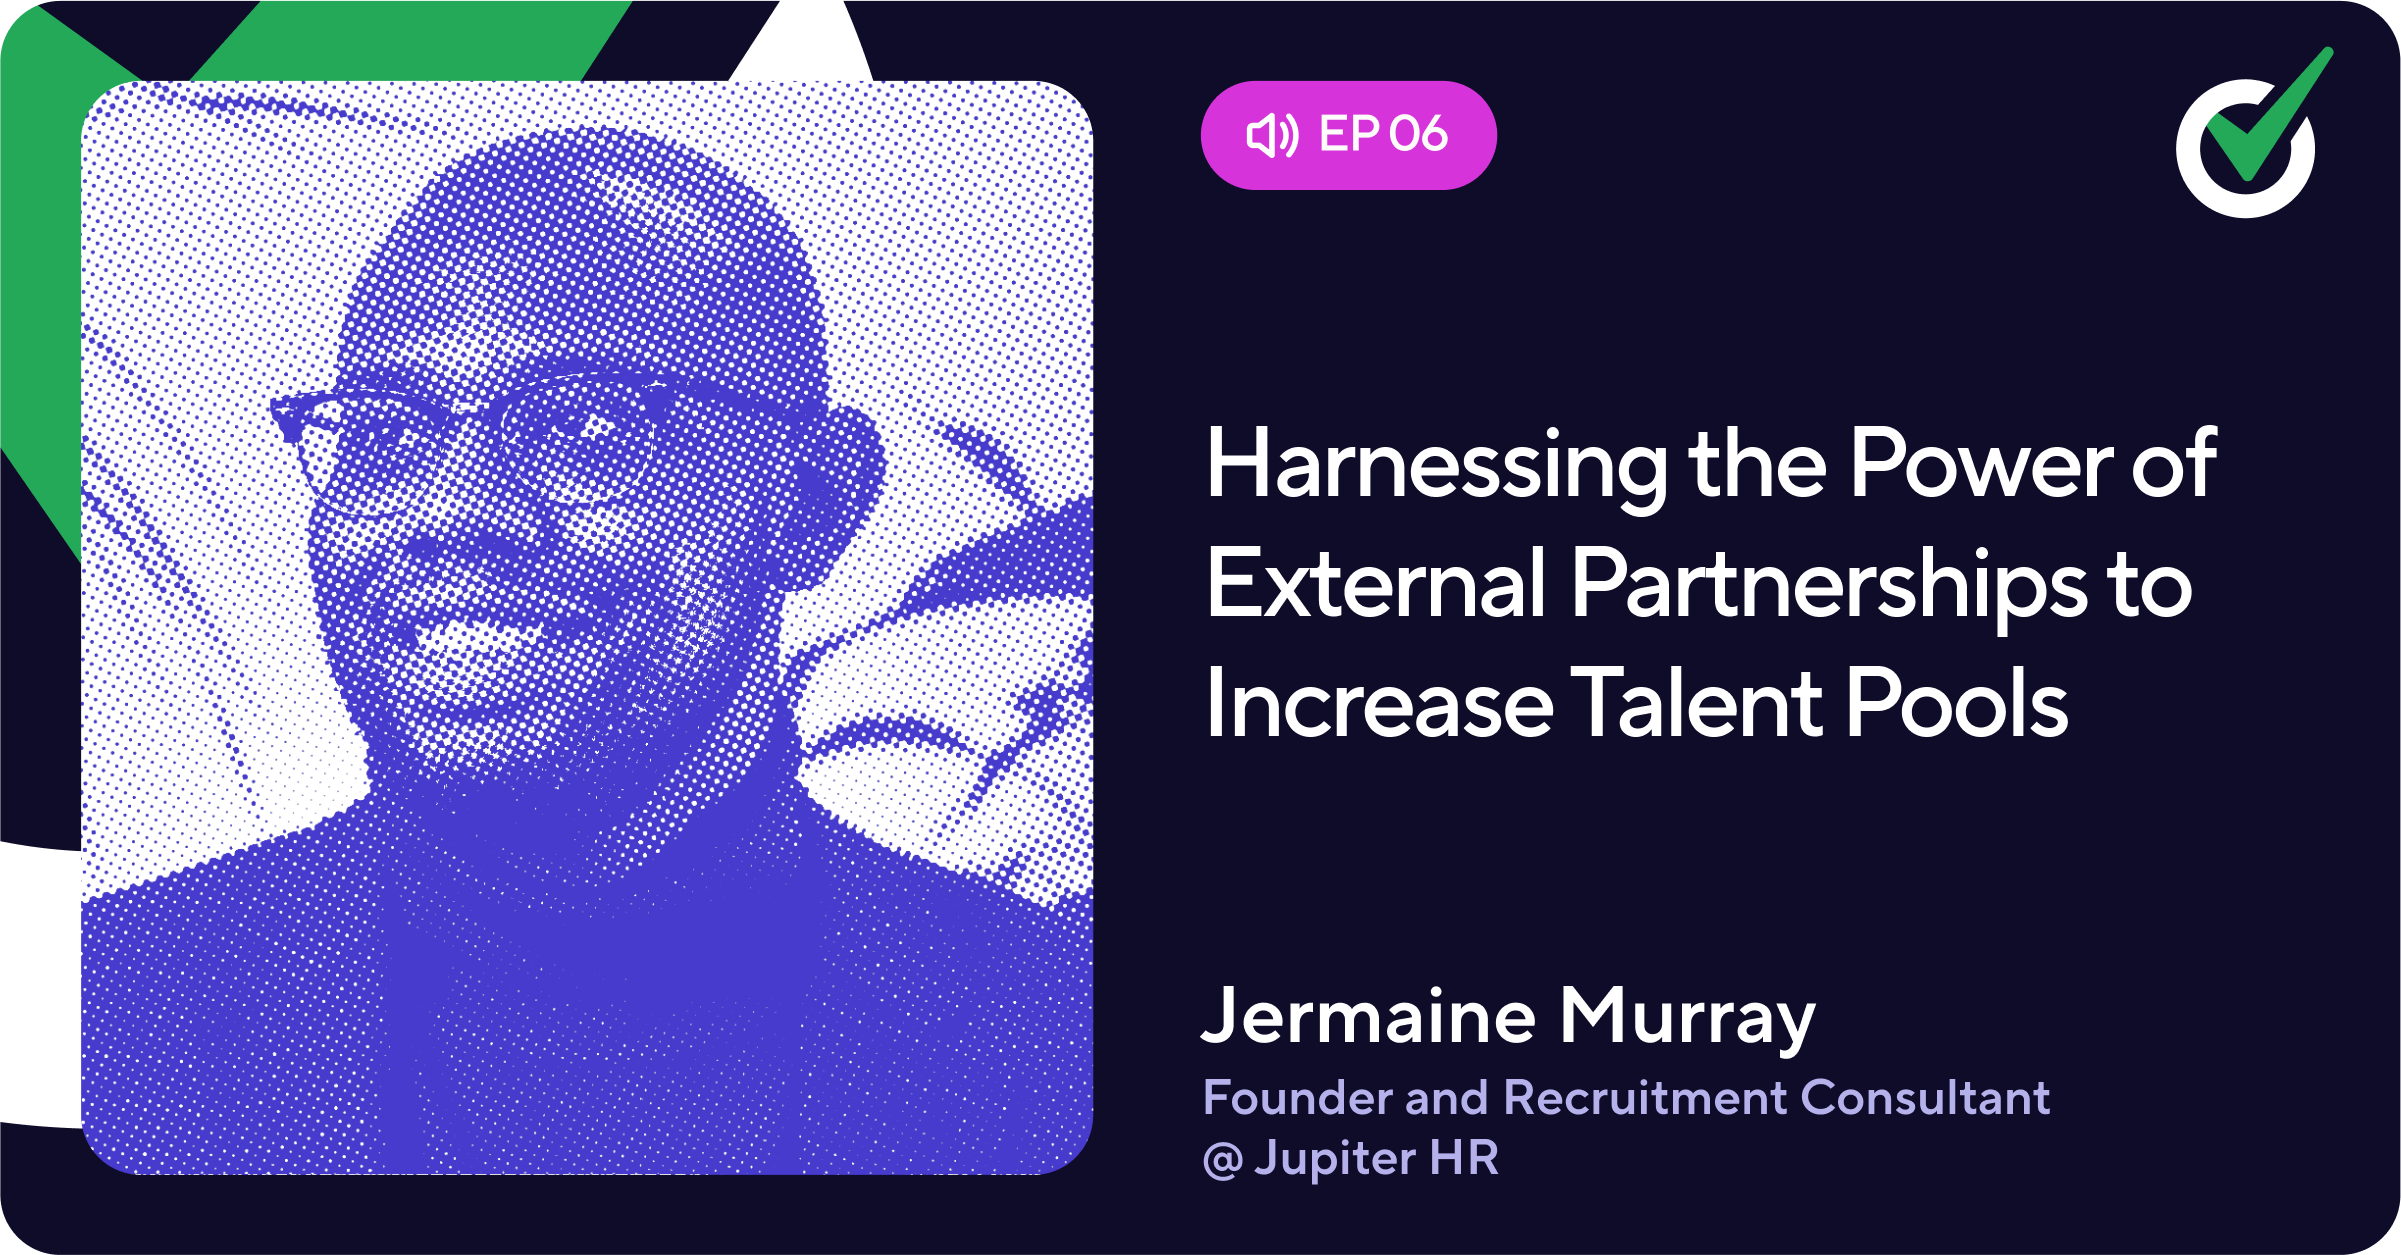 Episode 6 - Harnessing the Power of External Partnerships to Increase Talent Pools